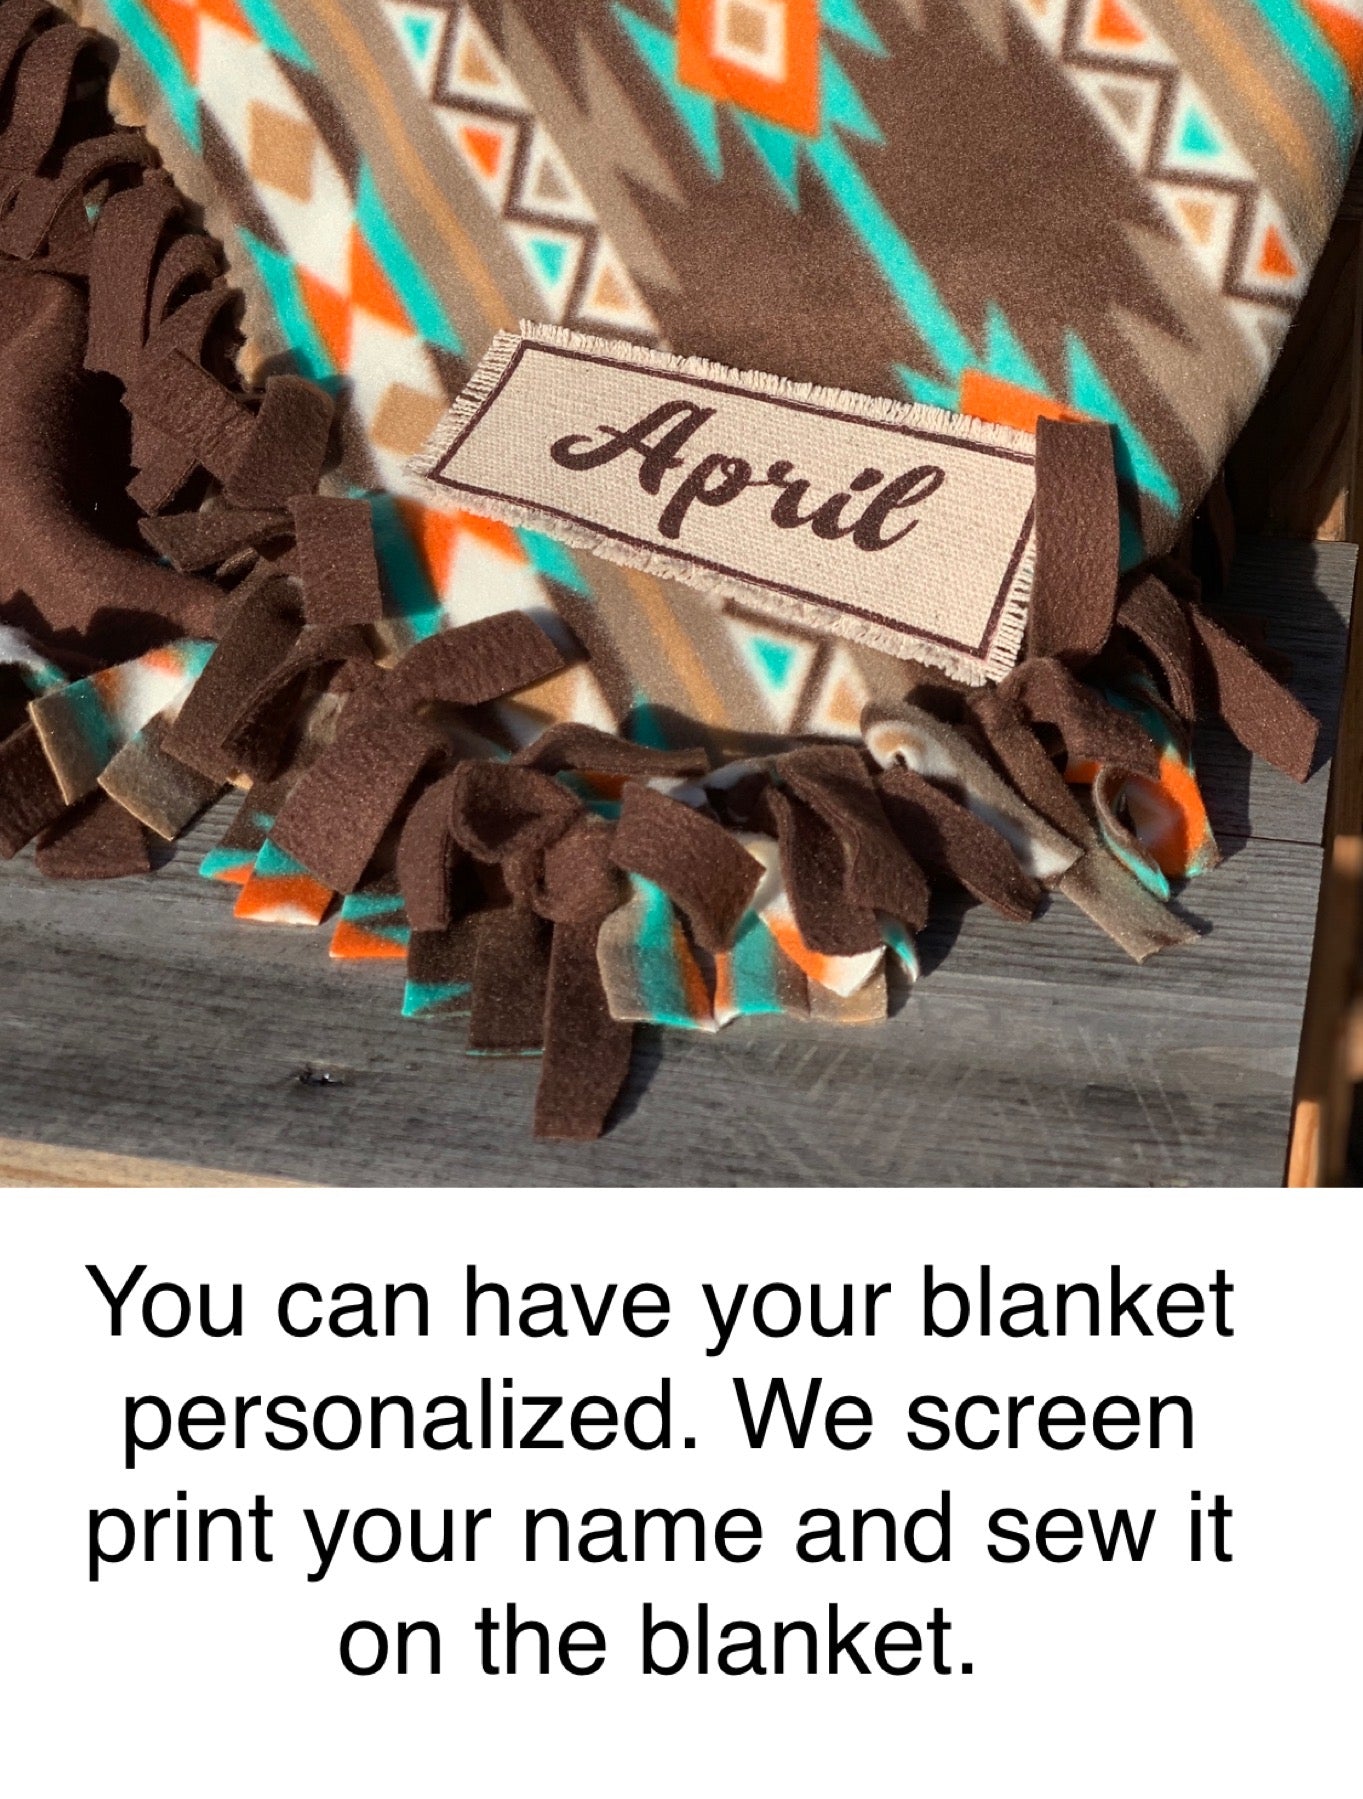 No Sew Blanket Kit - Camo Black Deer - Personalization Available